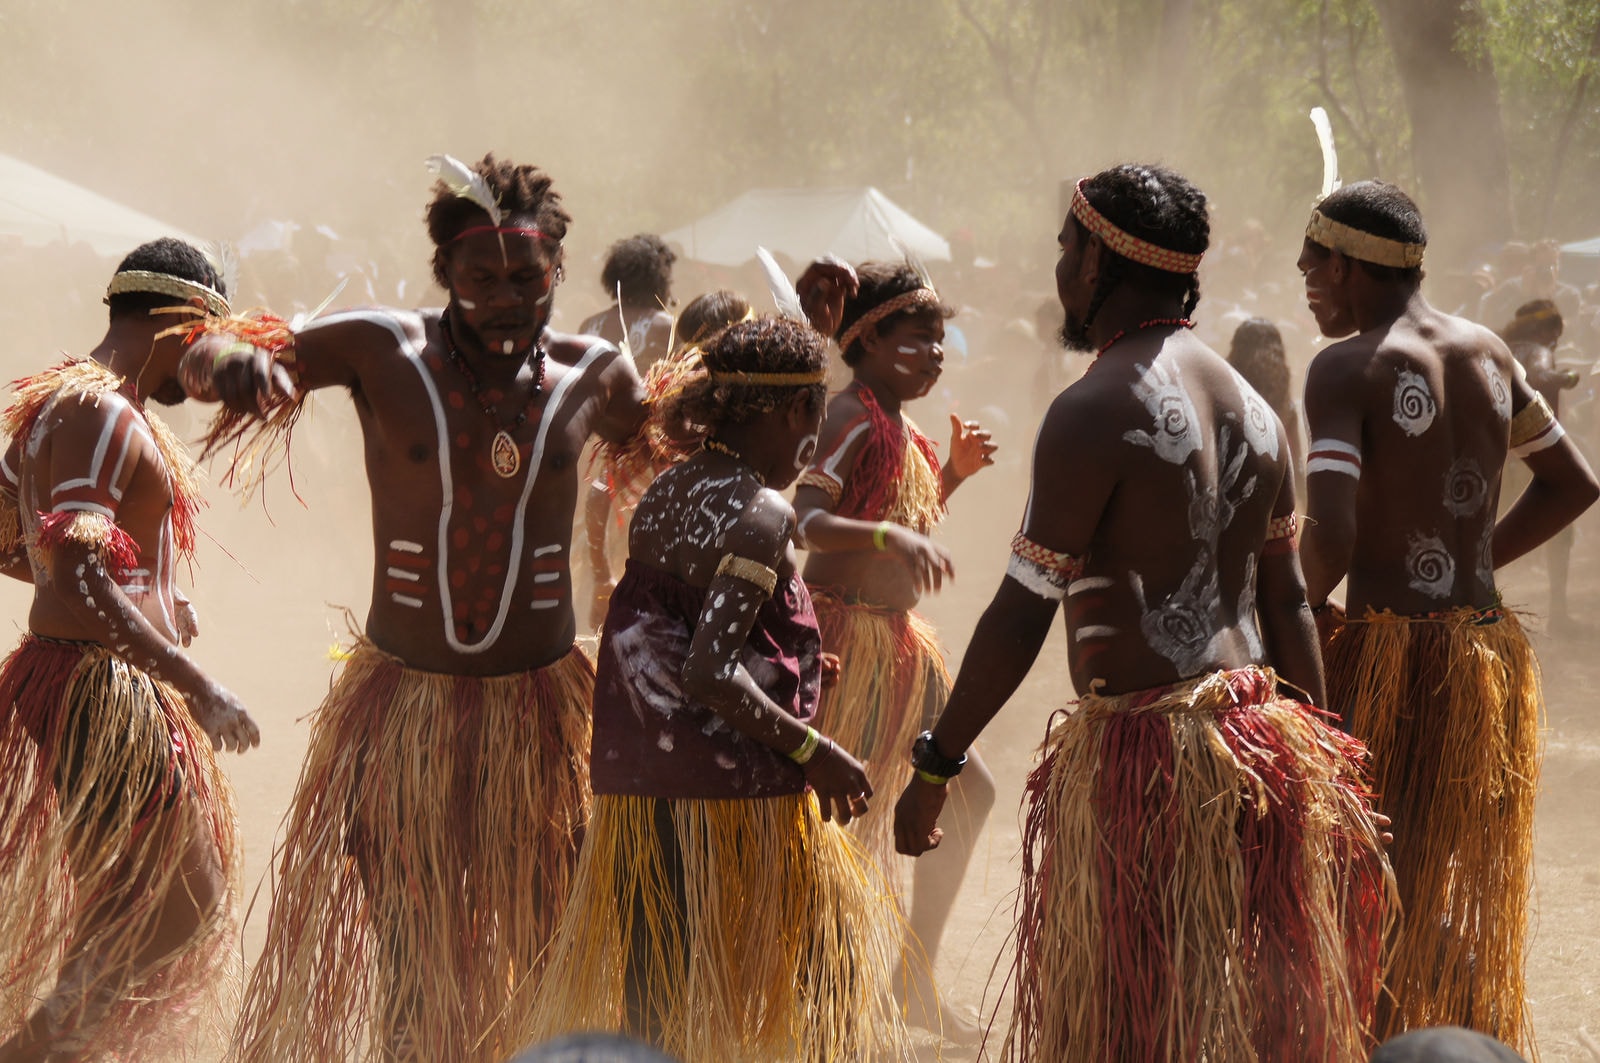 How do western systems and structures impact on aboriginal and torres strait islander cultures?